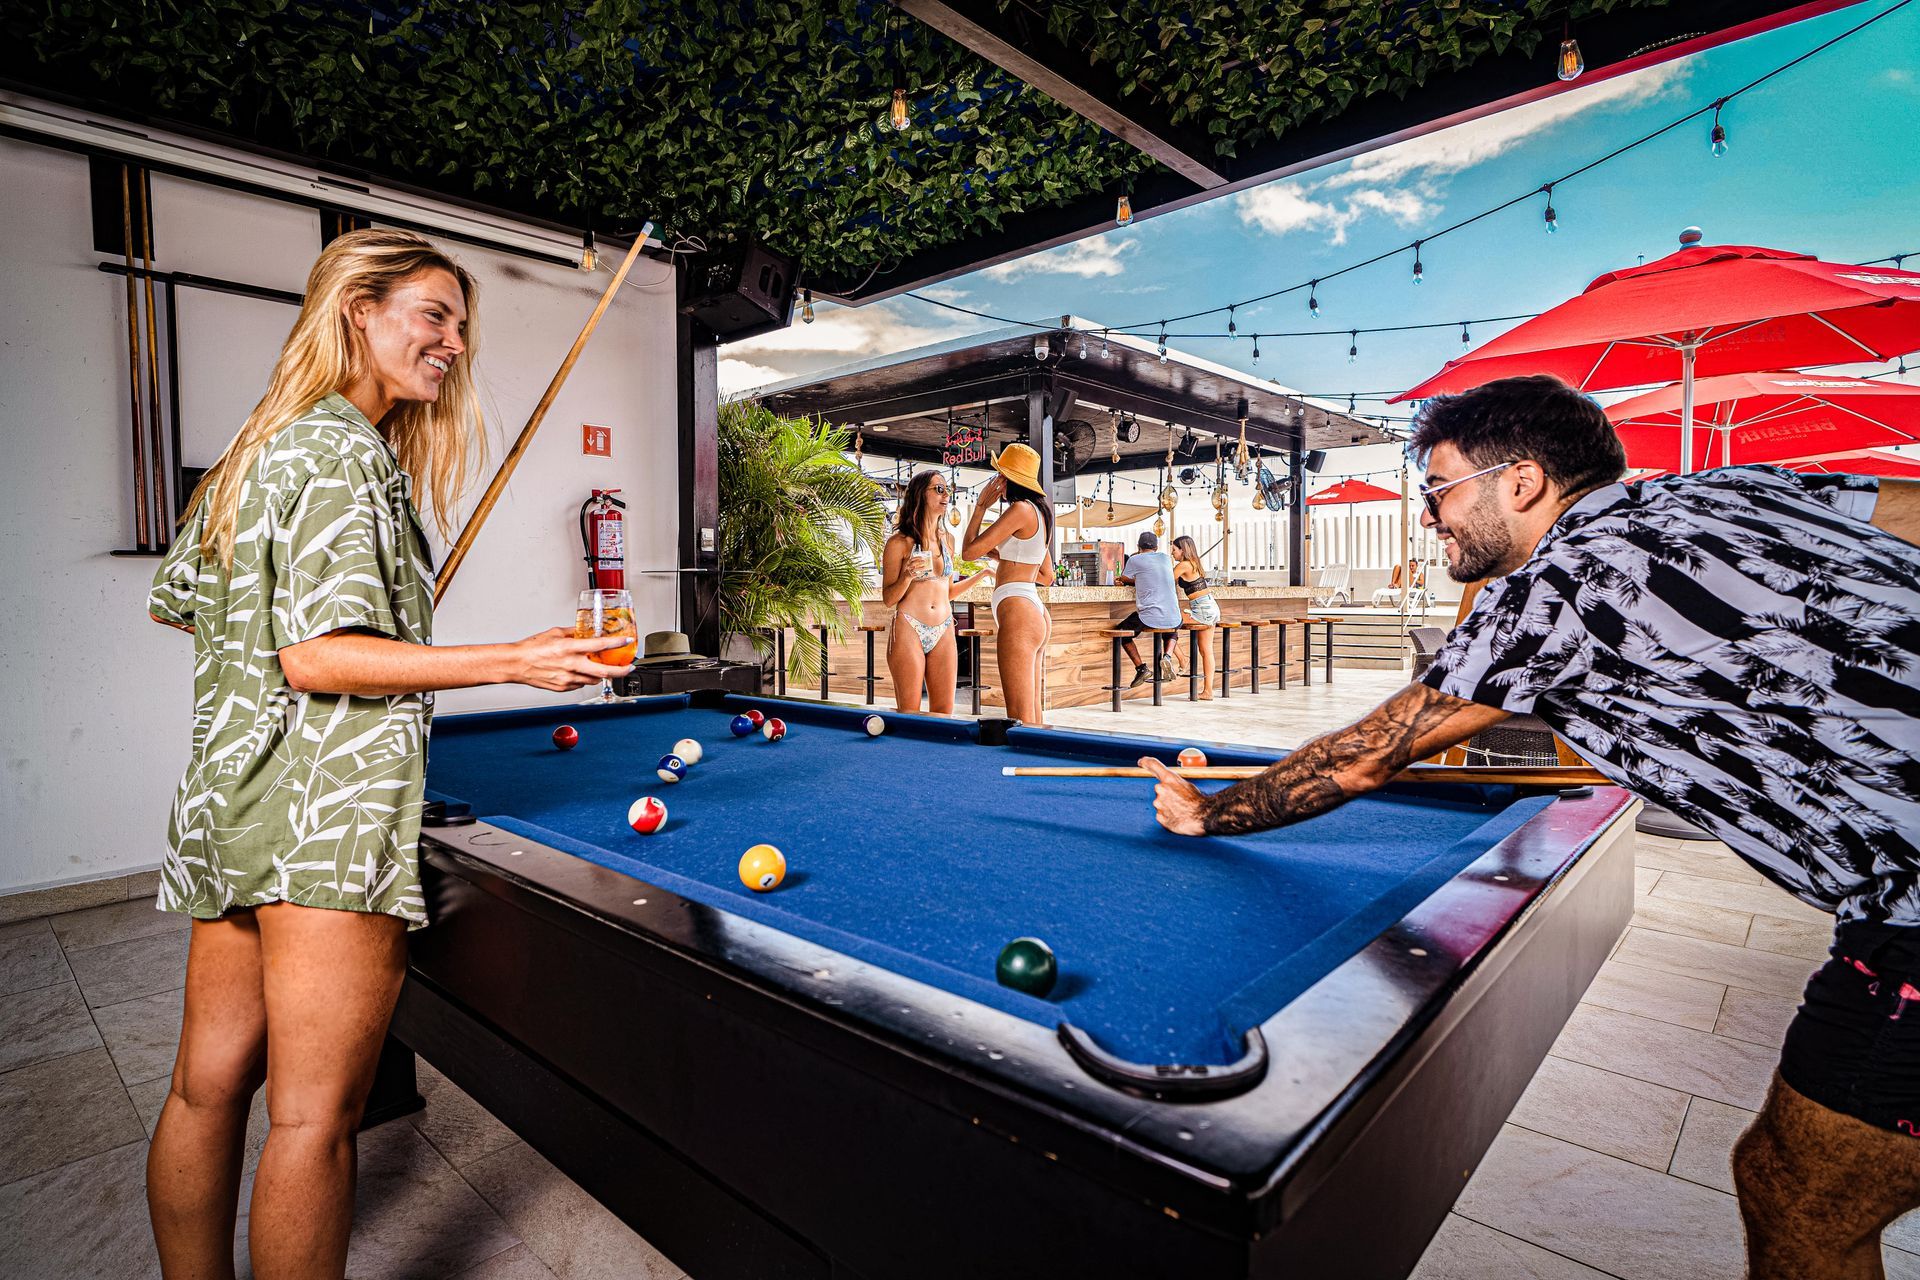 A man and a woman are playing pool on a pool table in nomads the best hotel in cancun downtown